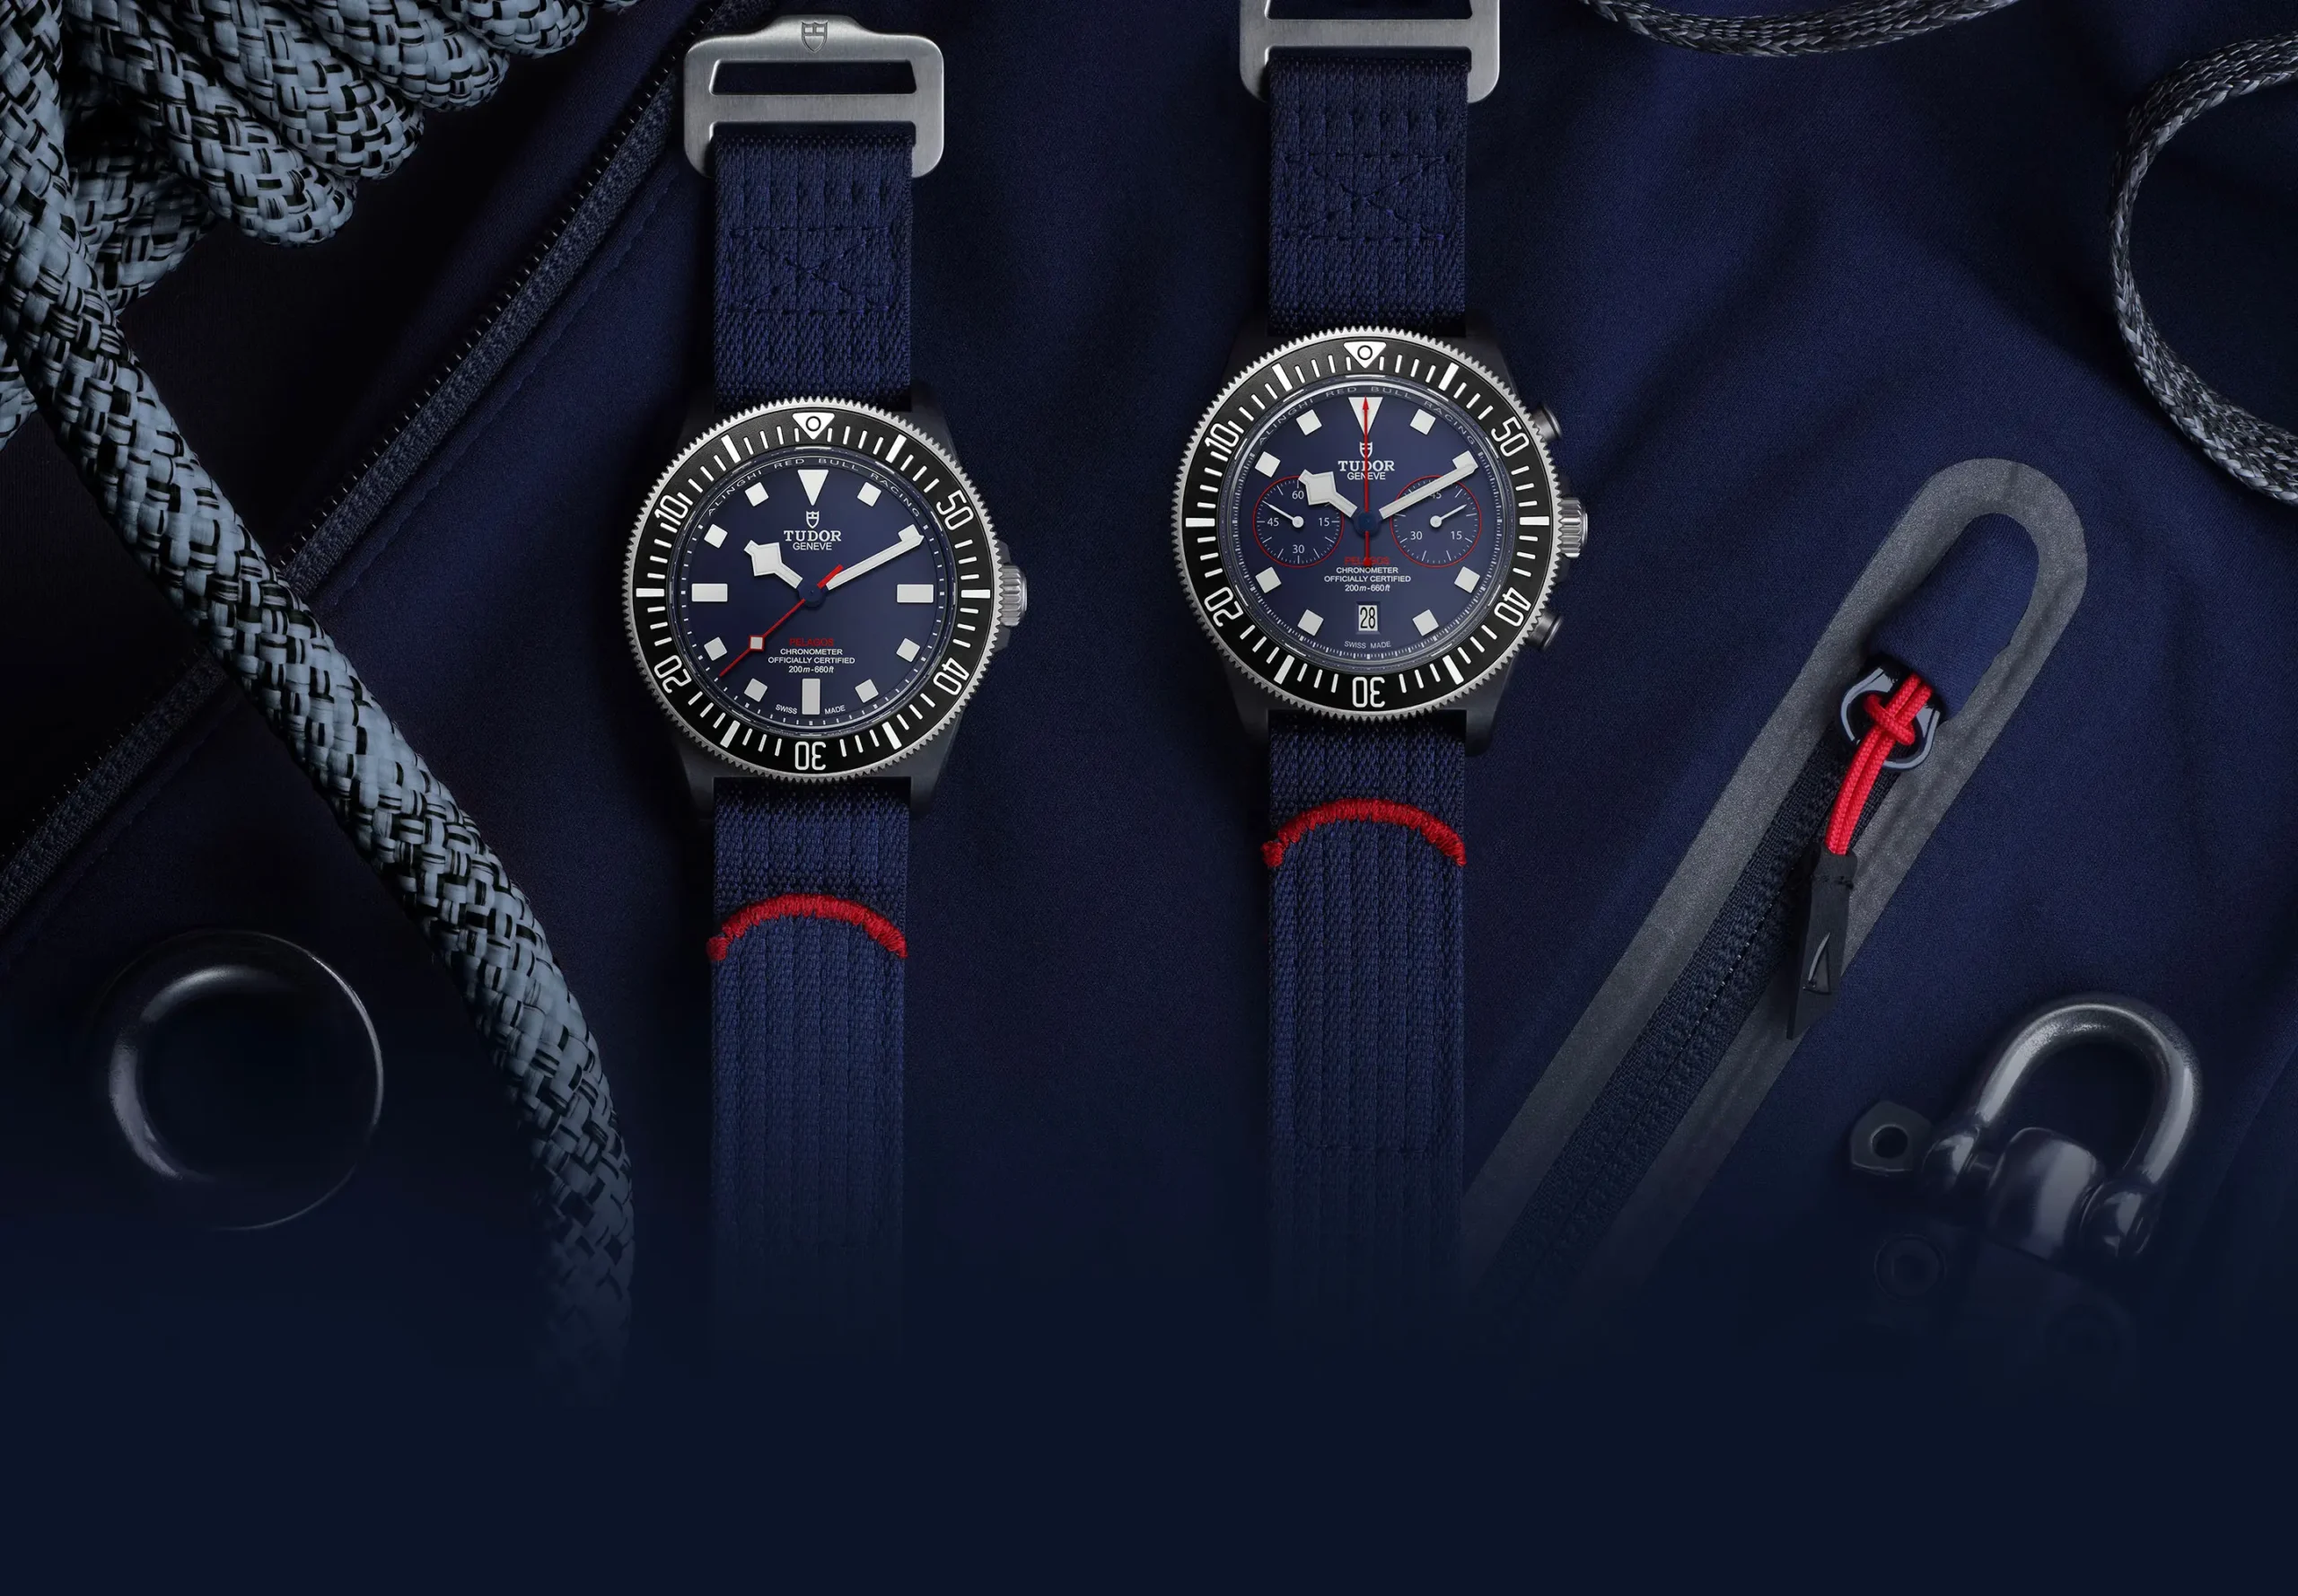 Two wristwatches with navy blue straps next to a backpack and earphones on a dark fabric background.